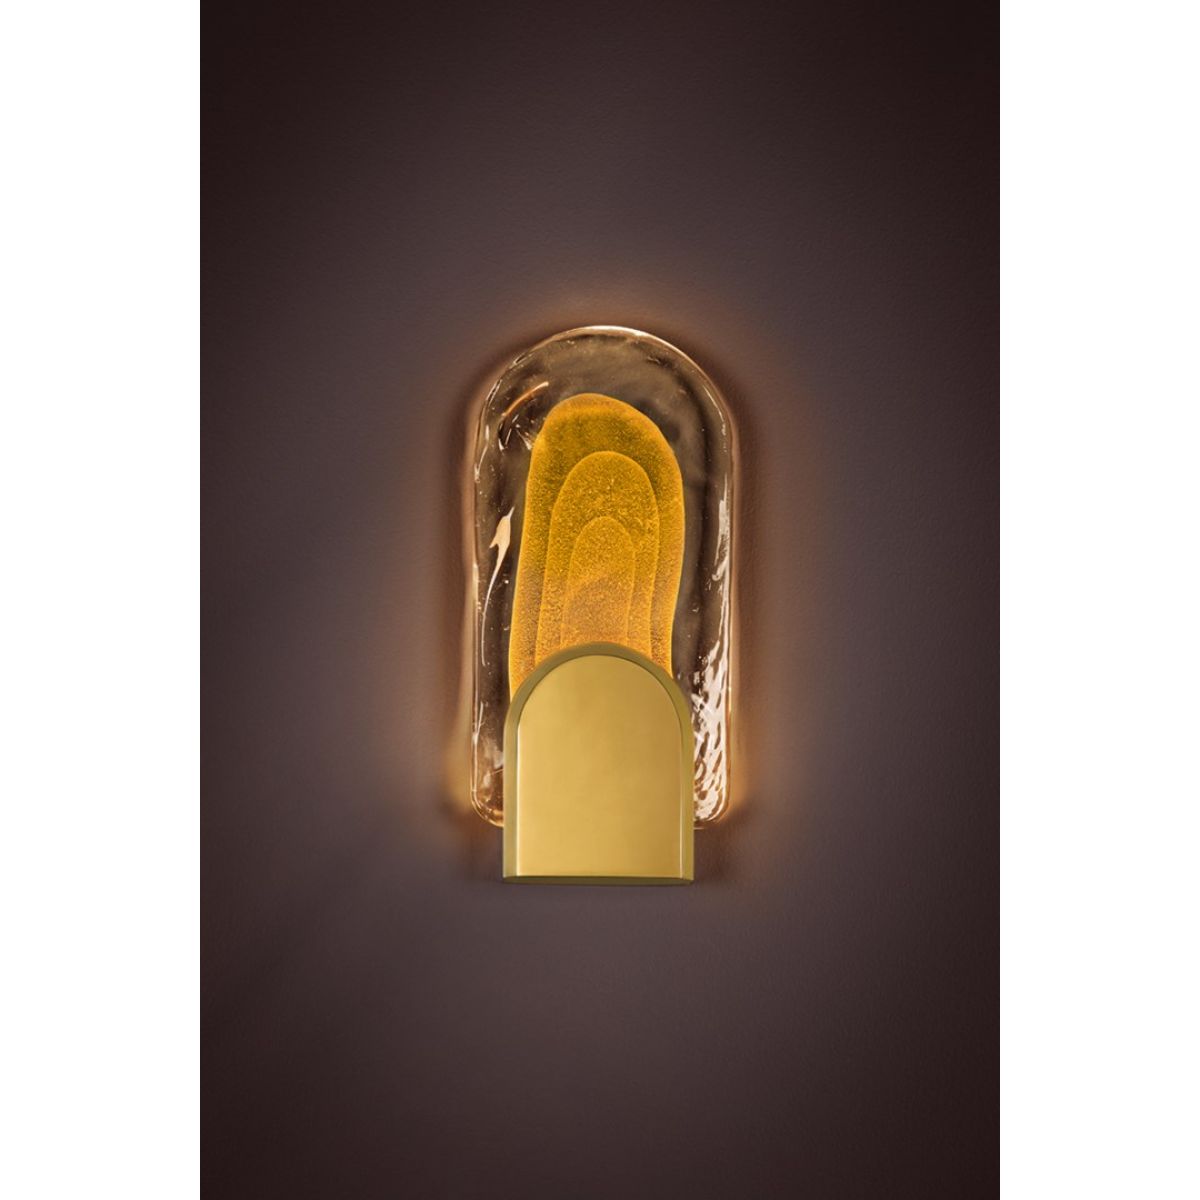 Morganite 17 in. LED Wall Sconce vintage brass Finish